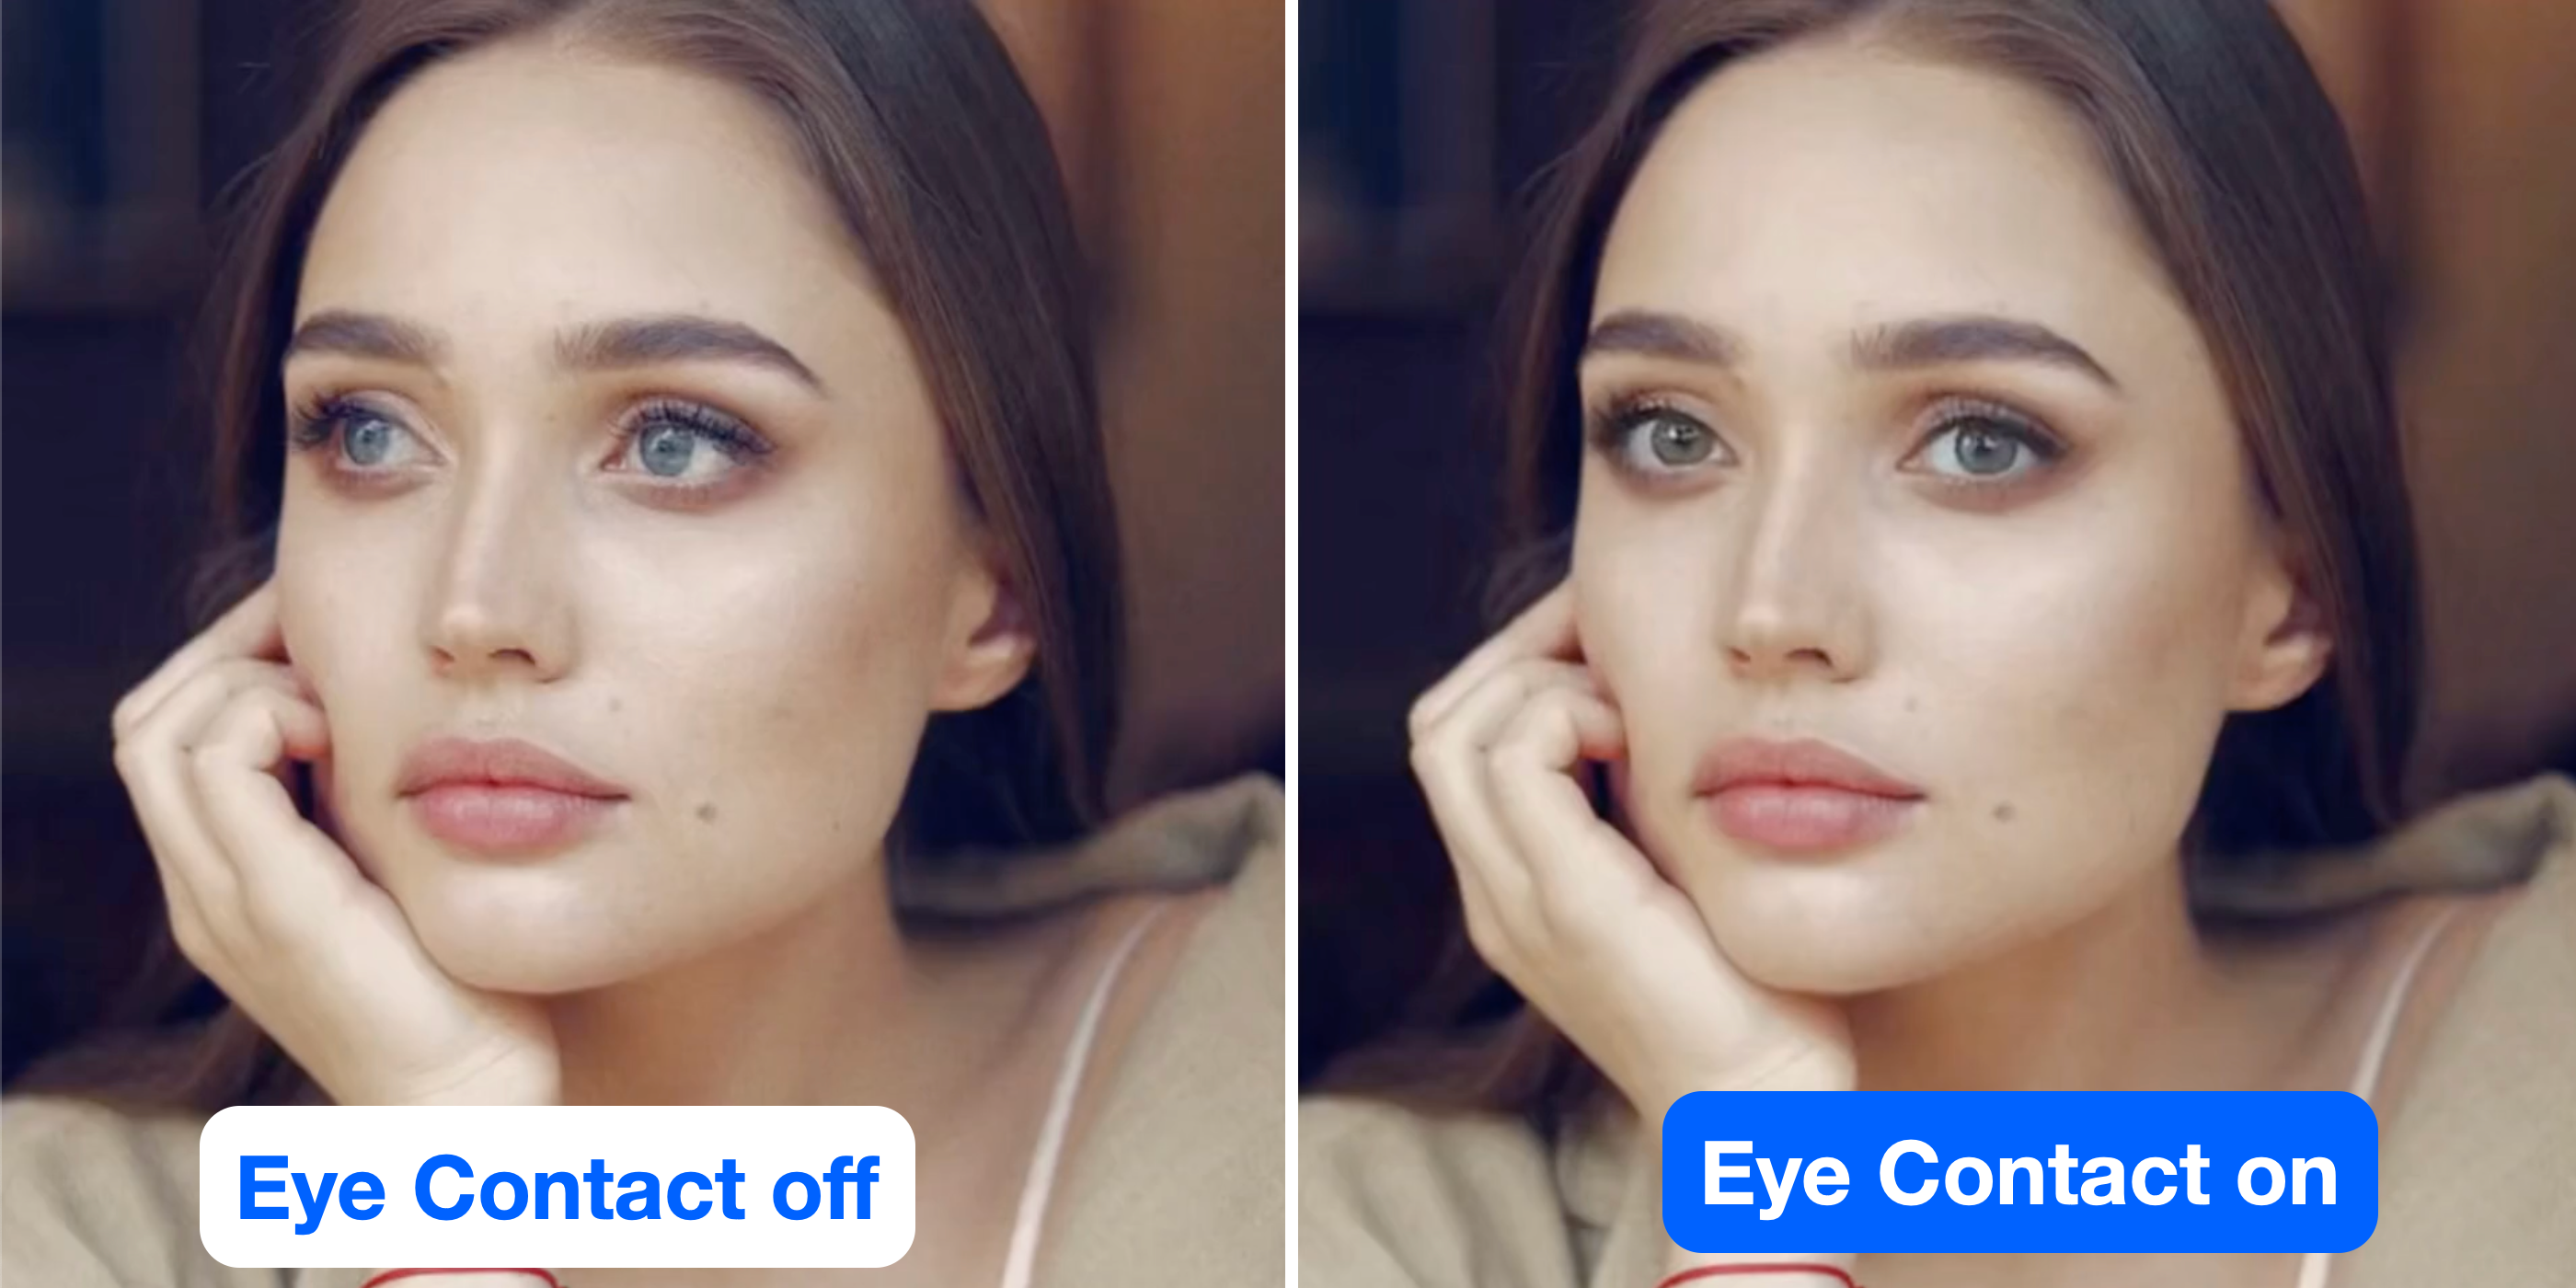 Screenshot: before and after applying Eye Contact to a video of a person speaking